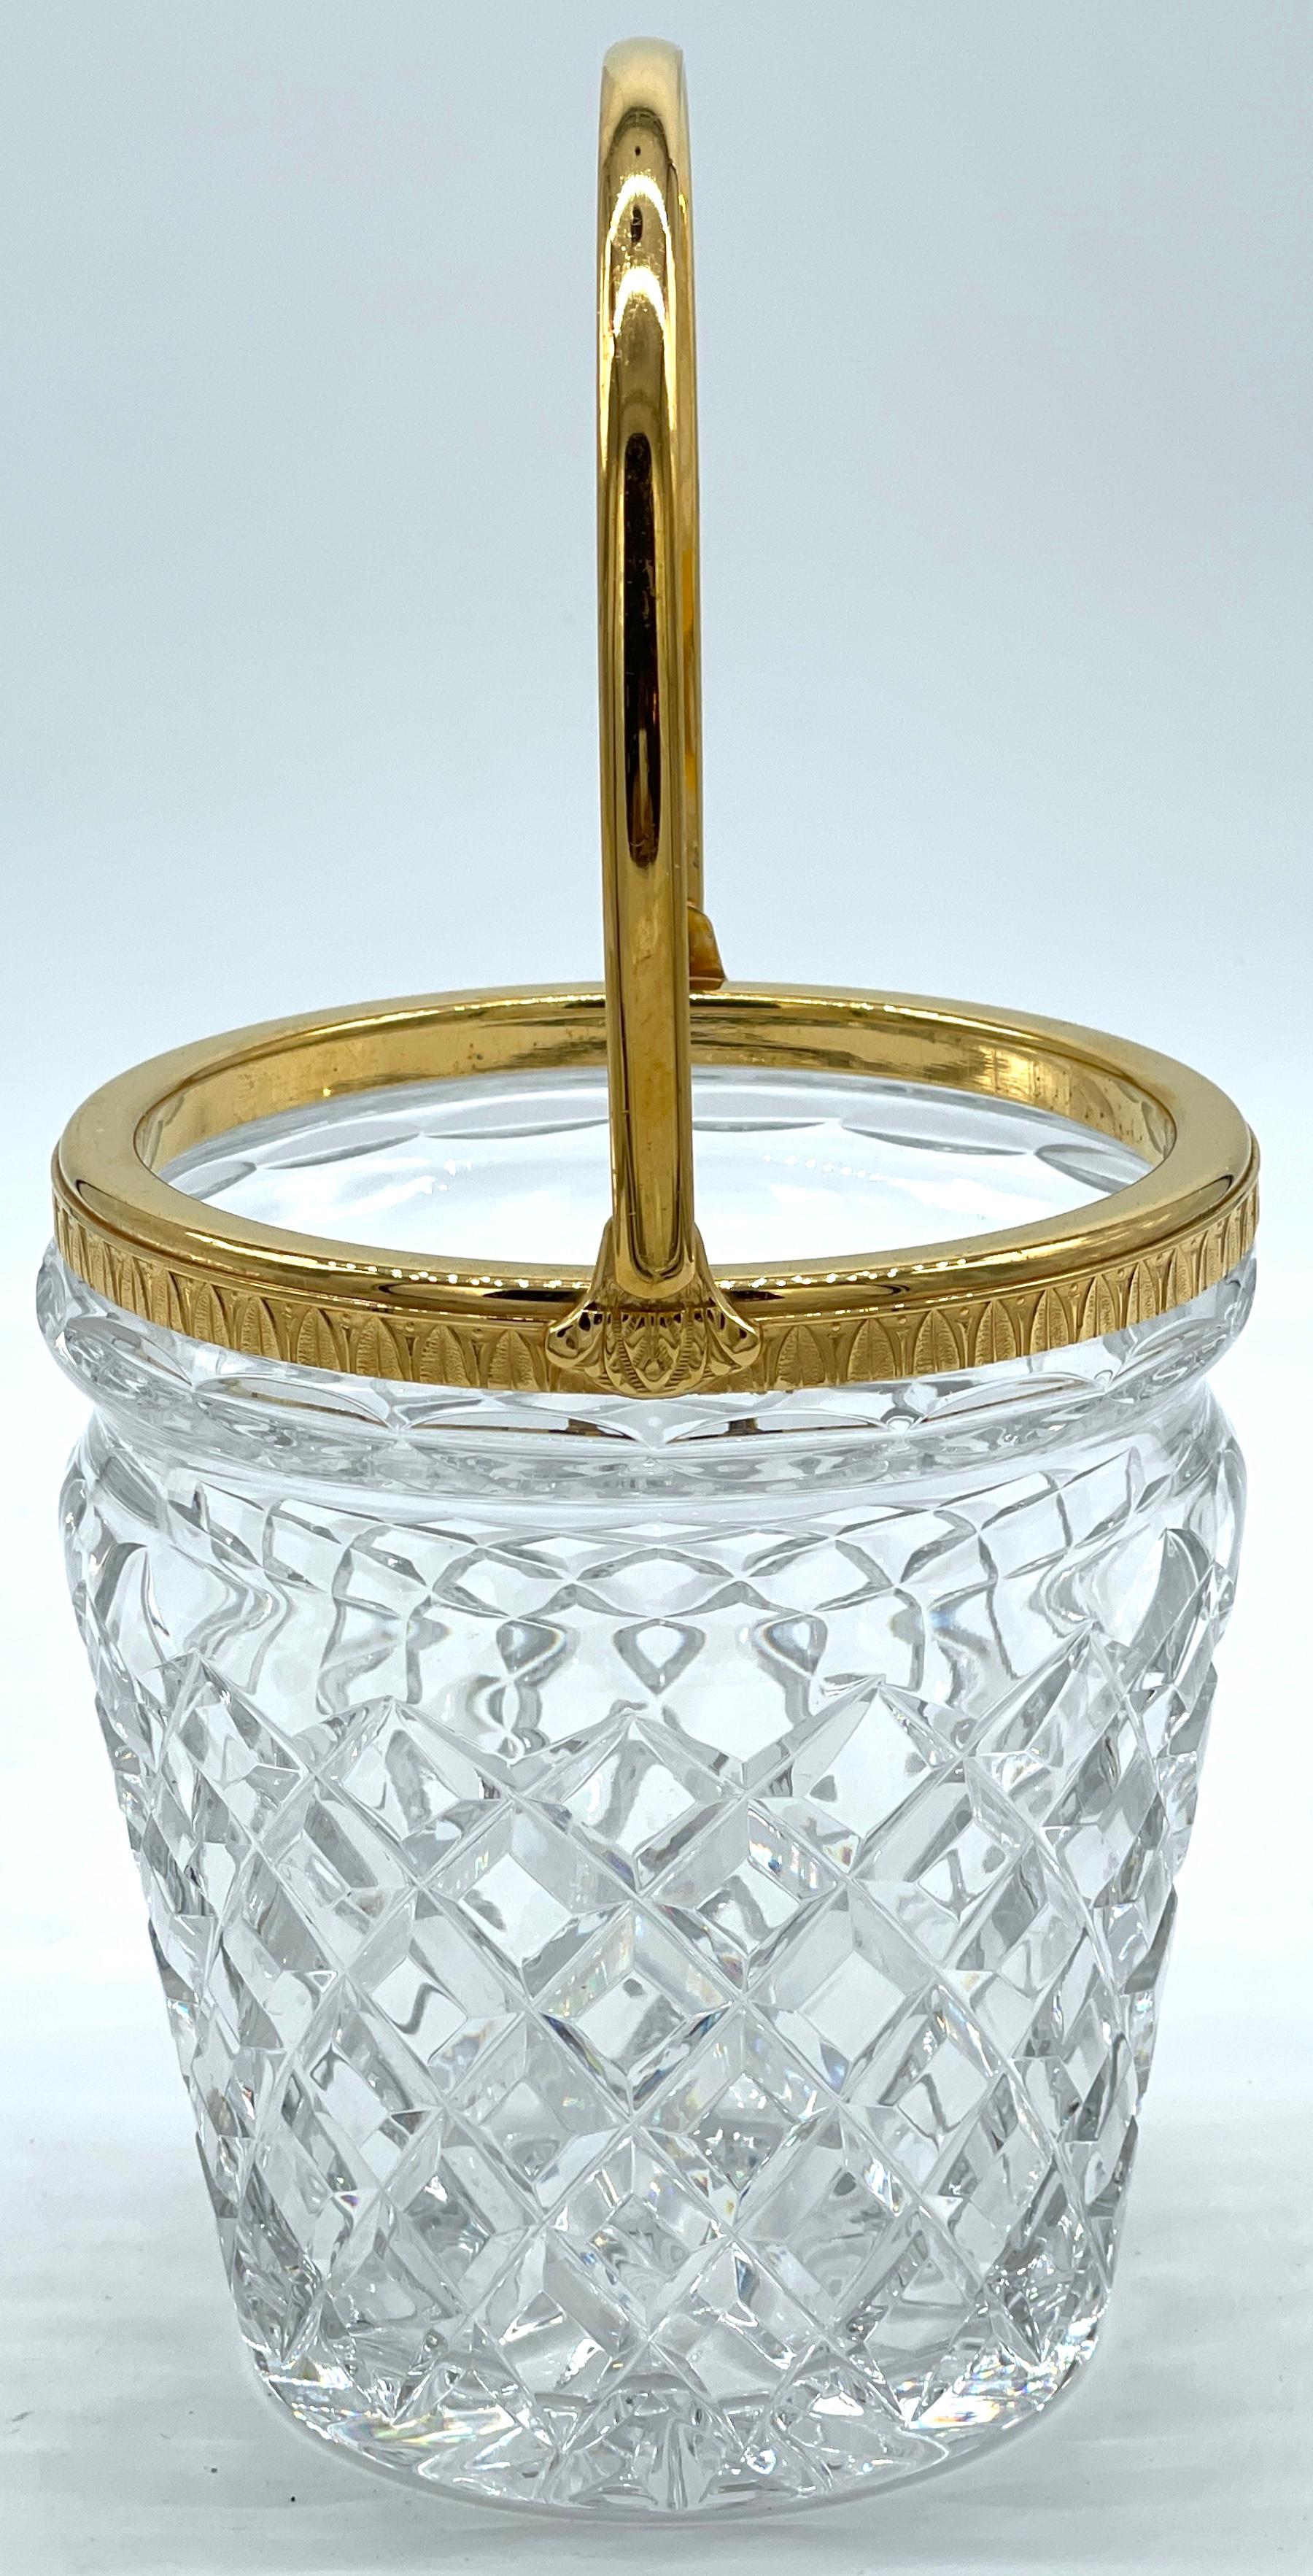  Christofle Neocalssical Cut Crystal Gold Washed Swing -Handled Ice Bucket In Good Condition For Sale In West Palm Beach, FL